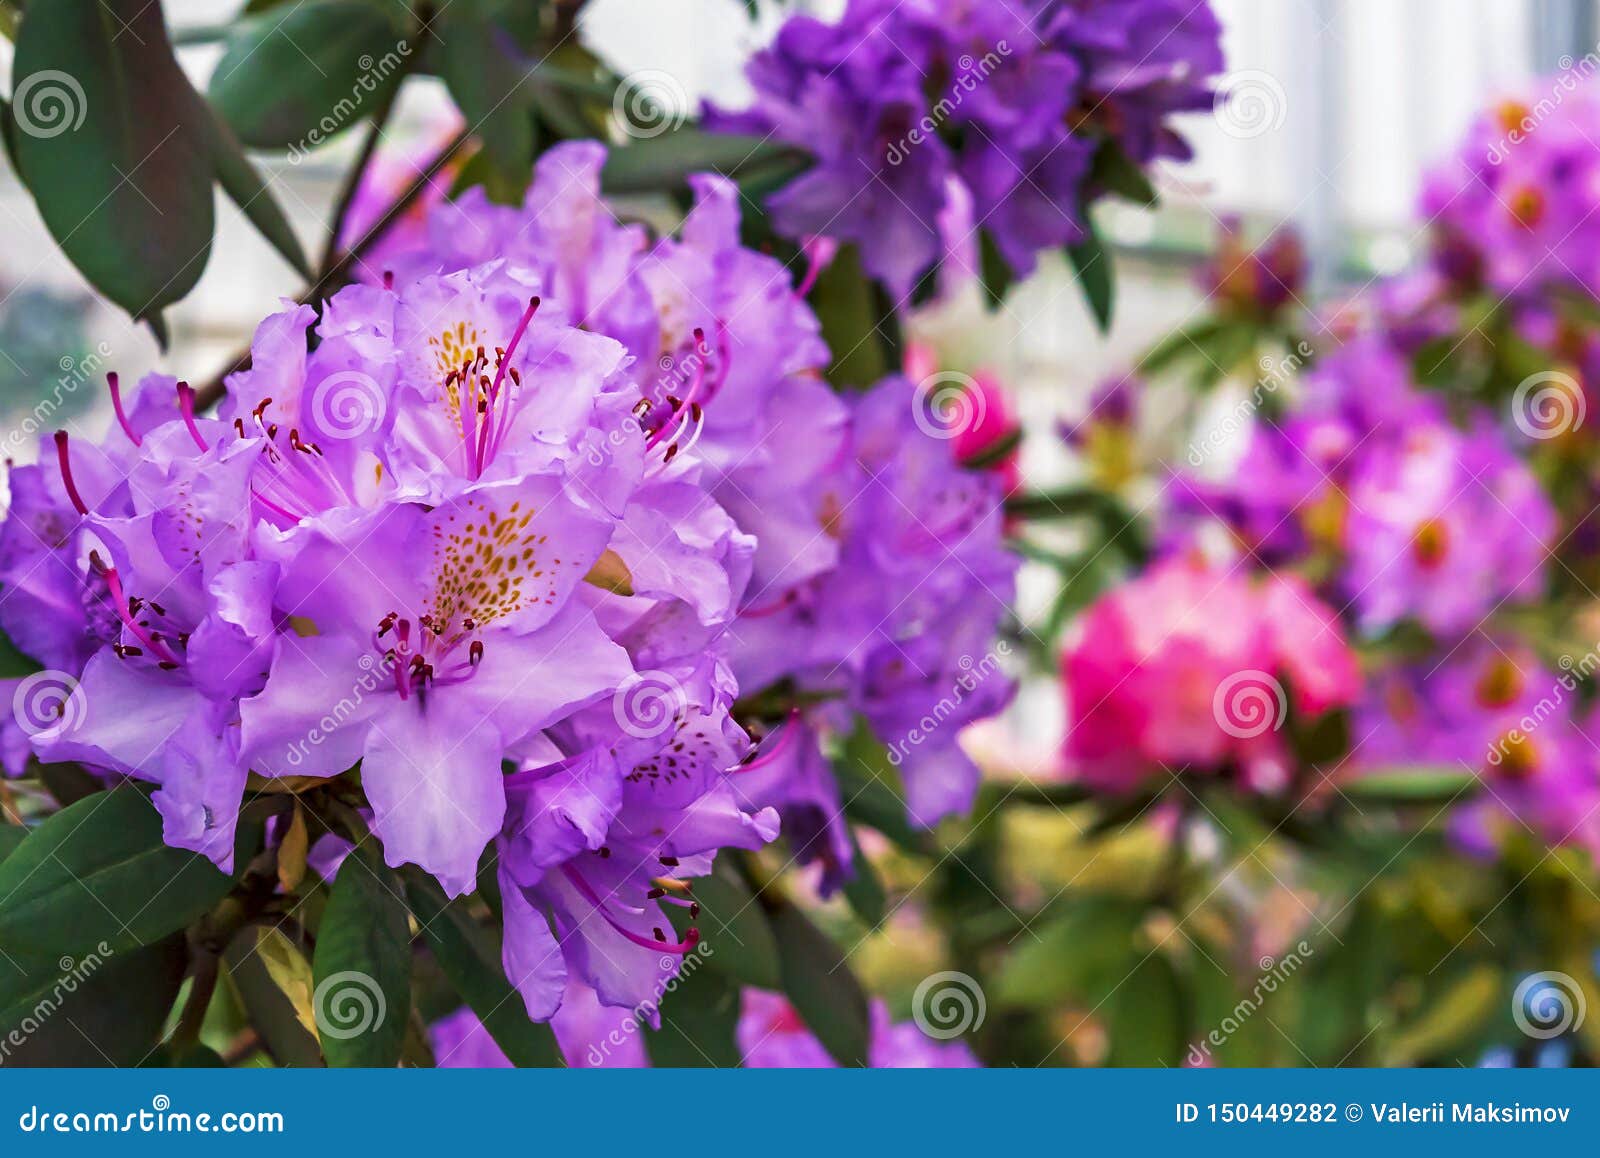 Pacific Rhododendron Rhododendron Macrophyllum Is A Large Leaved Species Of Rhododendron Native To The Pacific Coast Of North Stock Photo Image Of Delicate Park 150449282